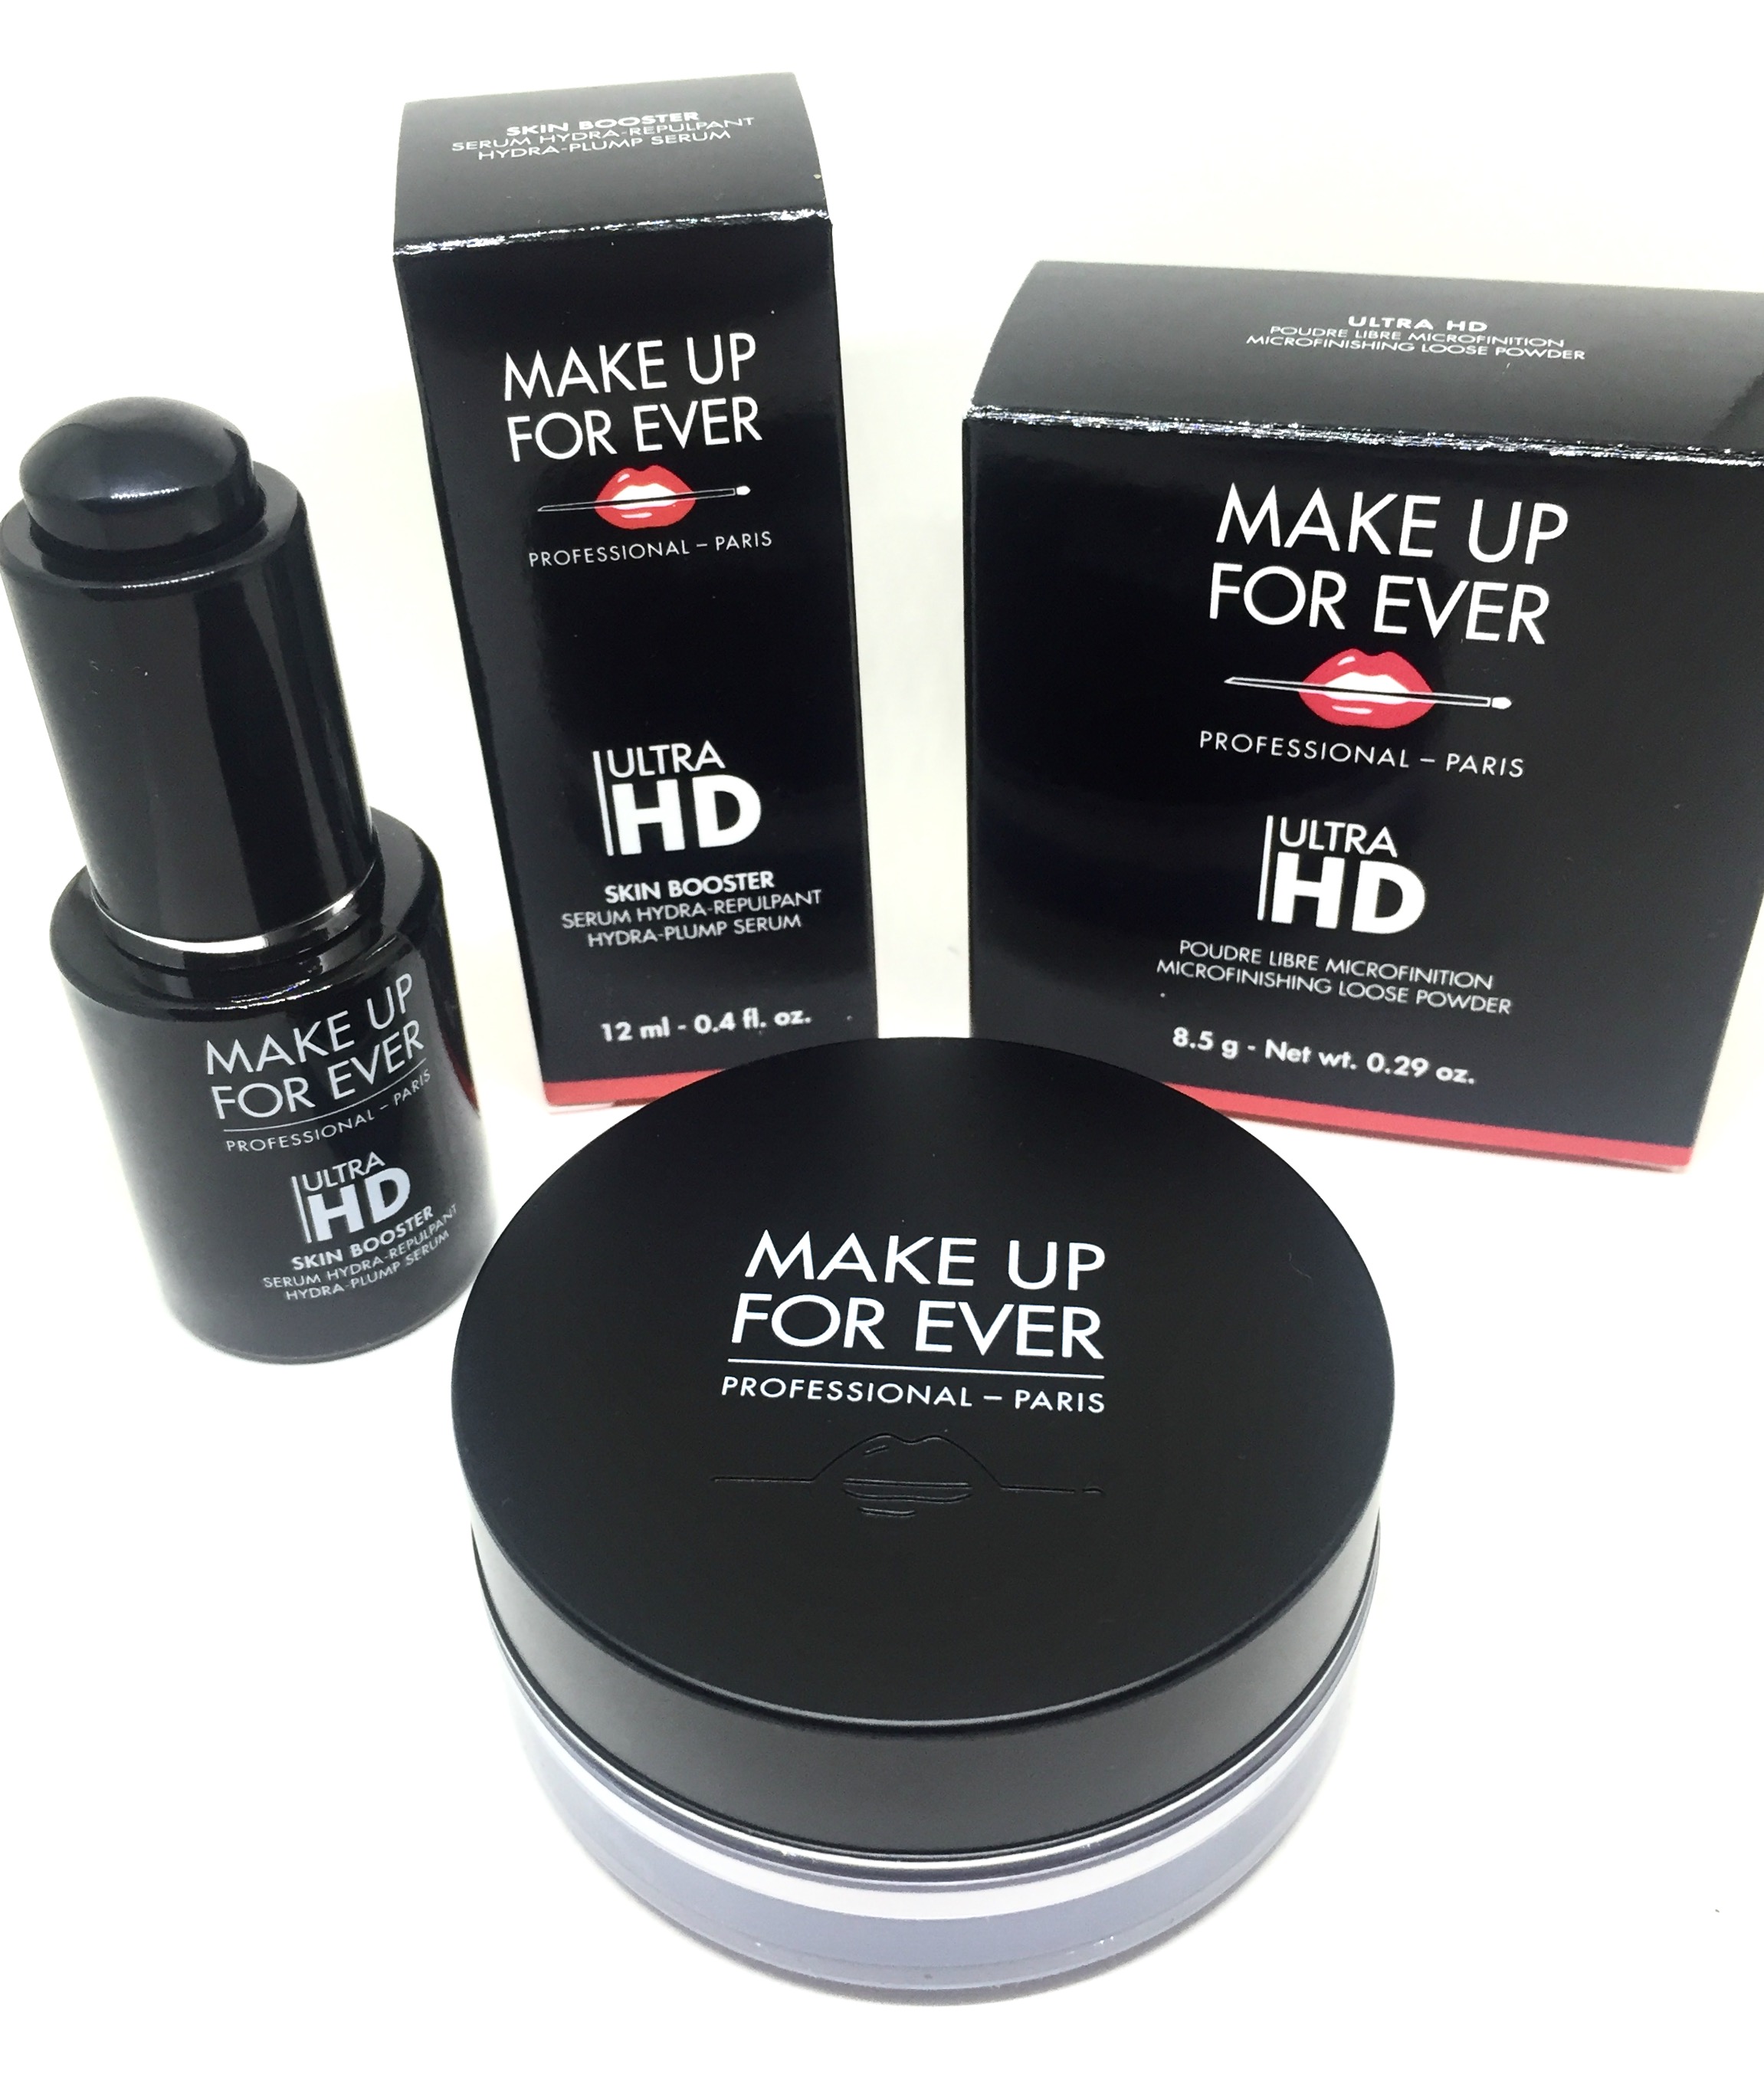 Make Up For Ever's Ultra HD Skin Booster Serum and Microfinishing